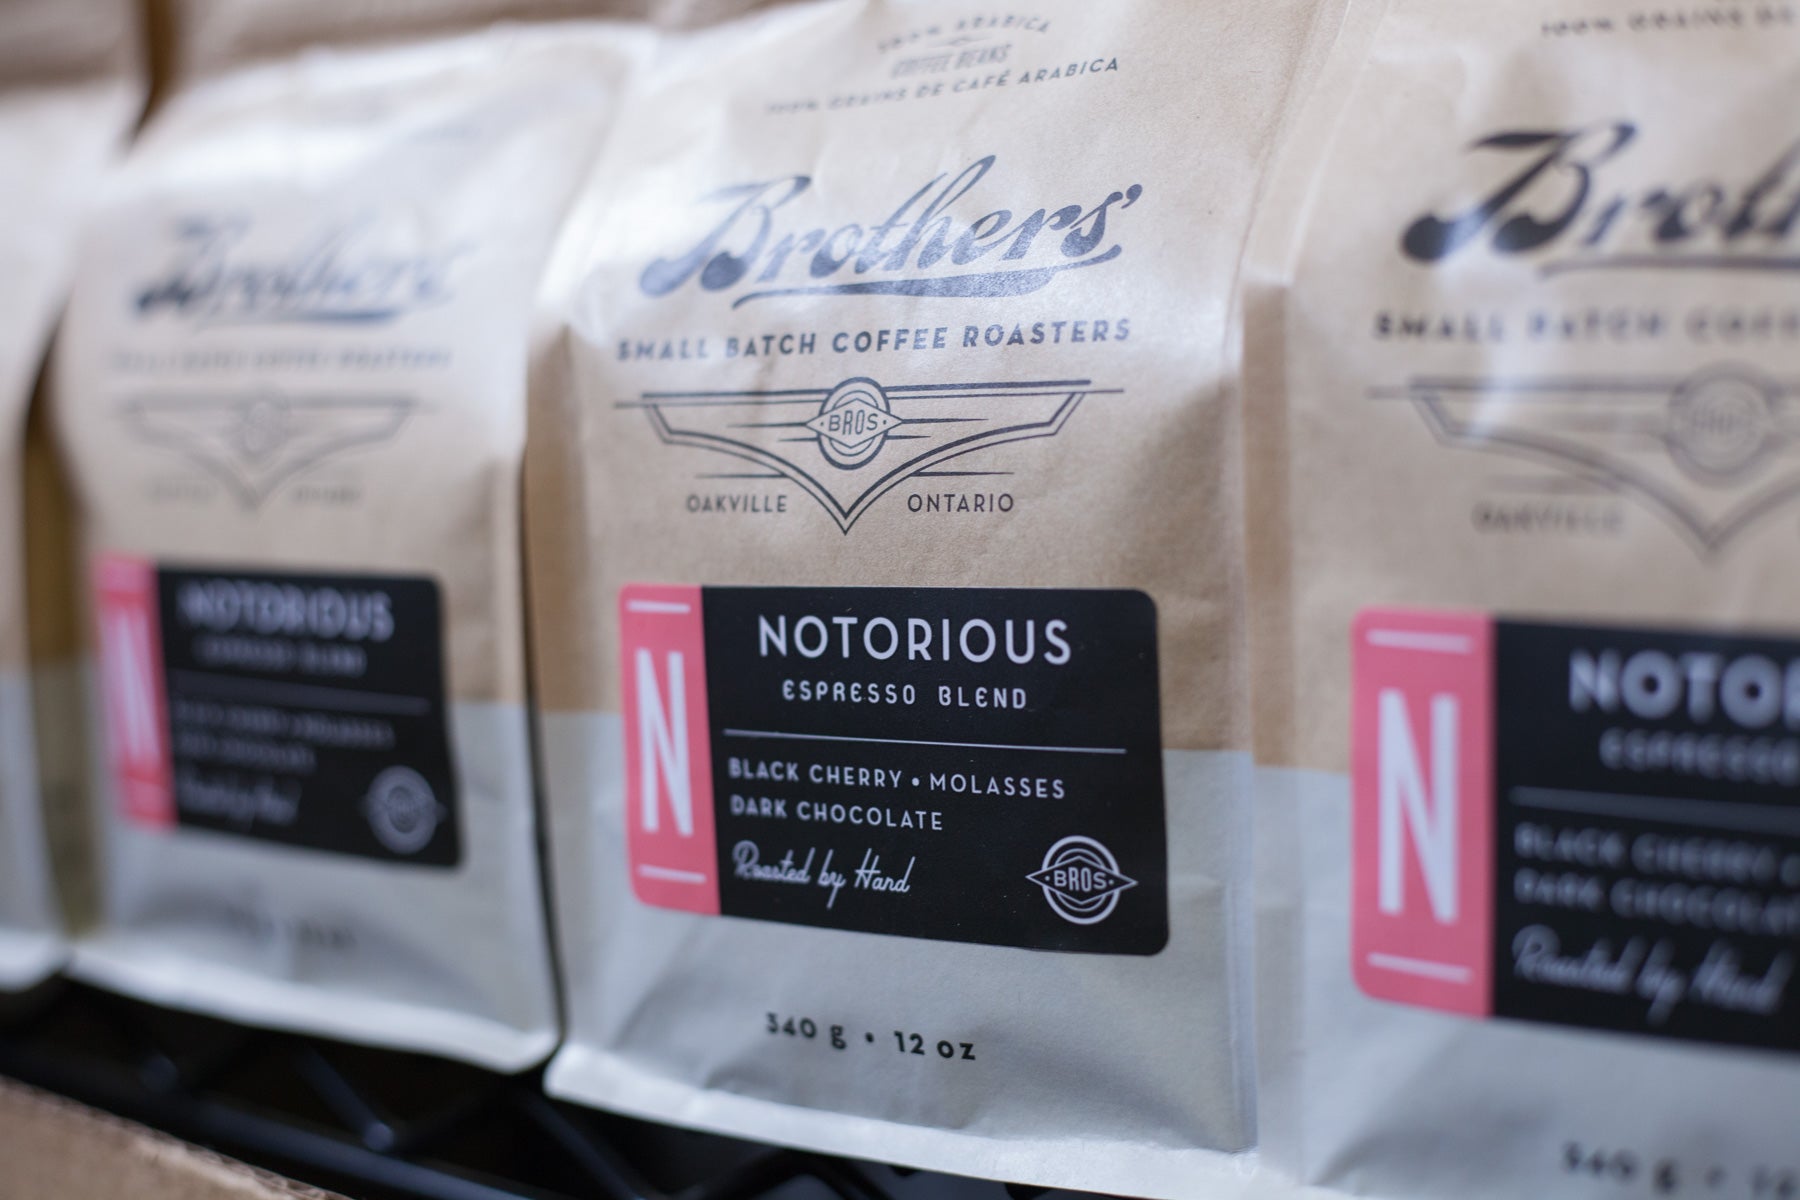 Brothers Coffee Roasters Notorious Espresso Blend